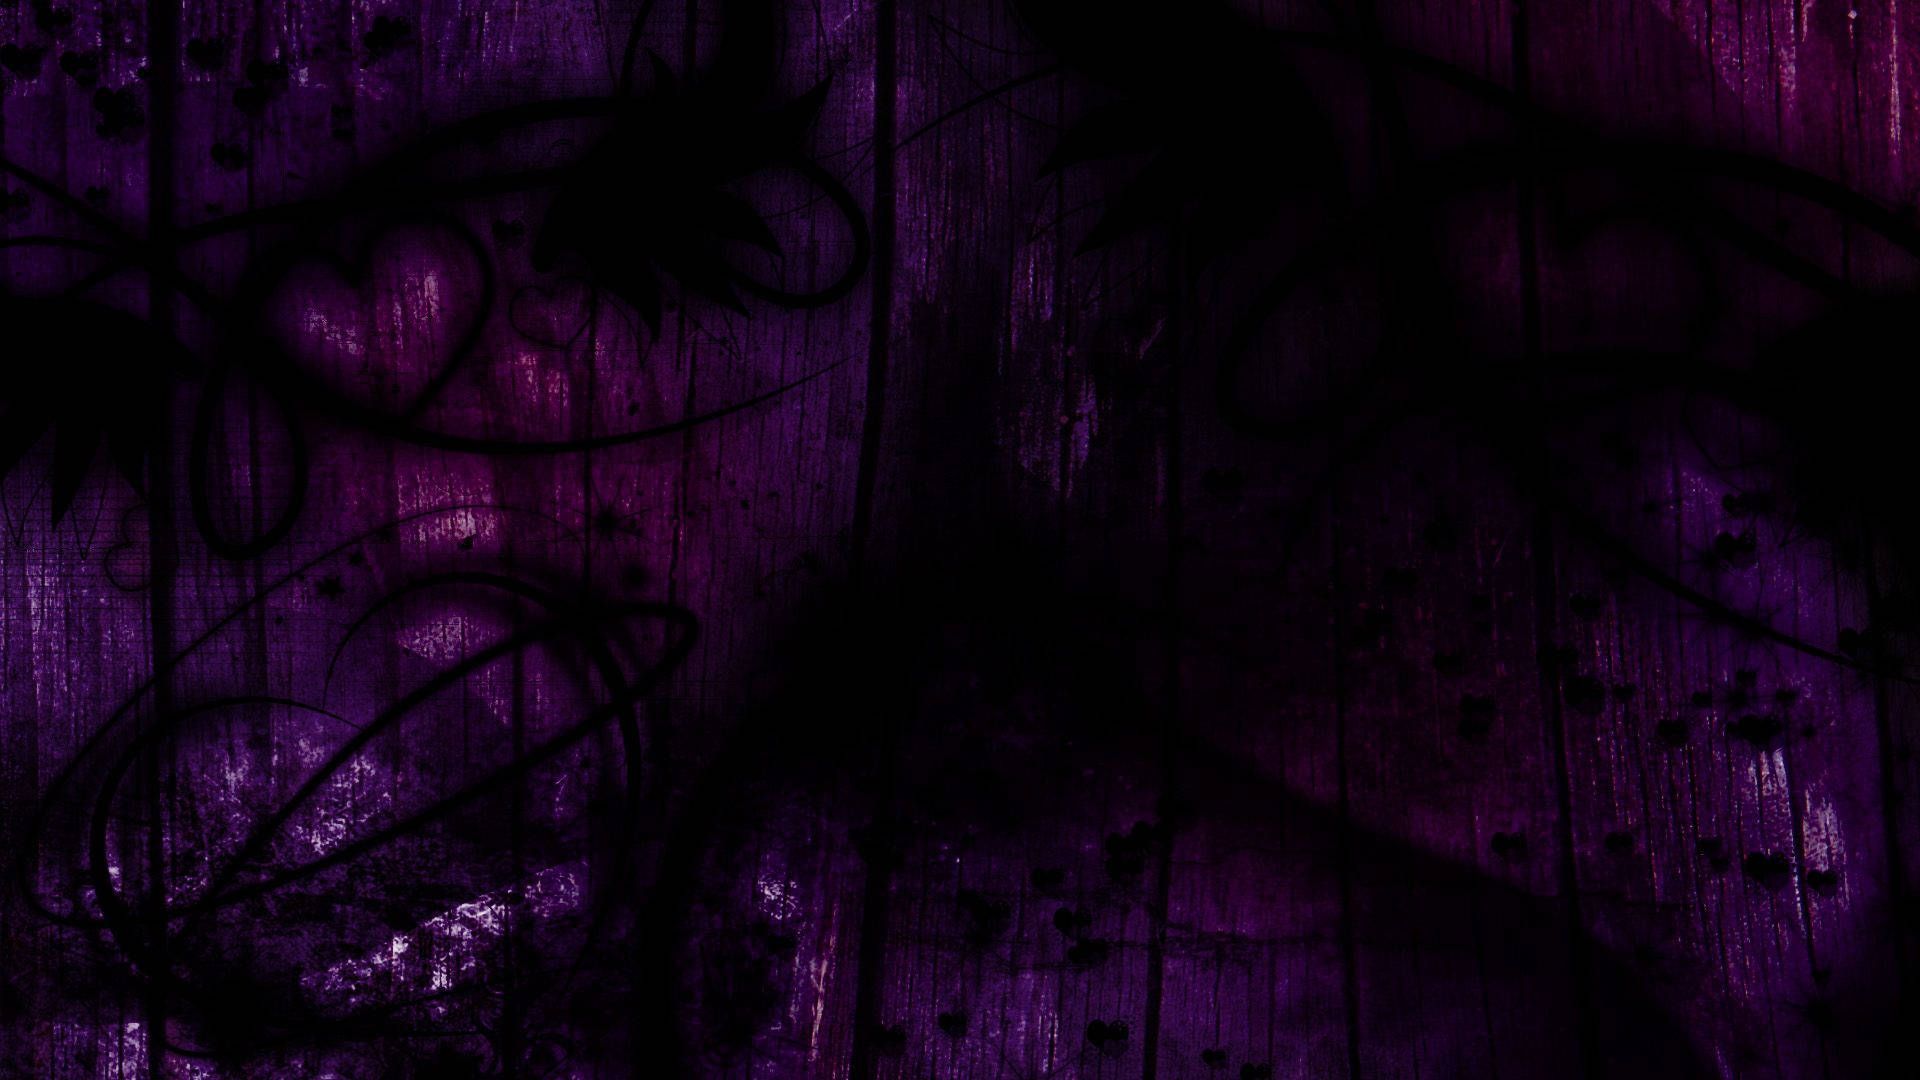 Purple abstract wallpaper with a grunge texture - Grunge